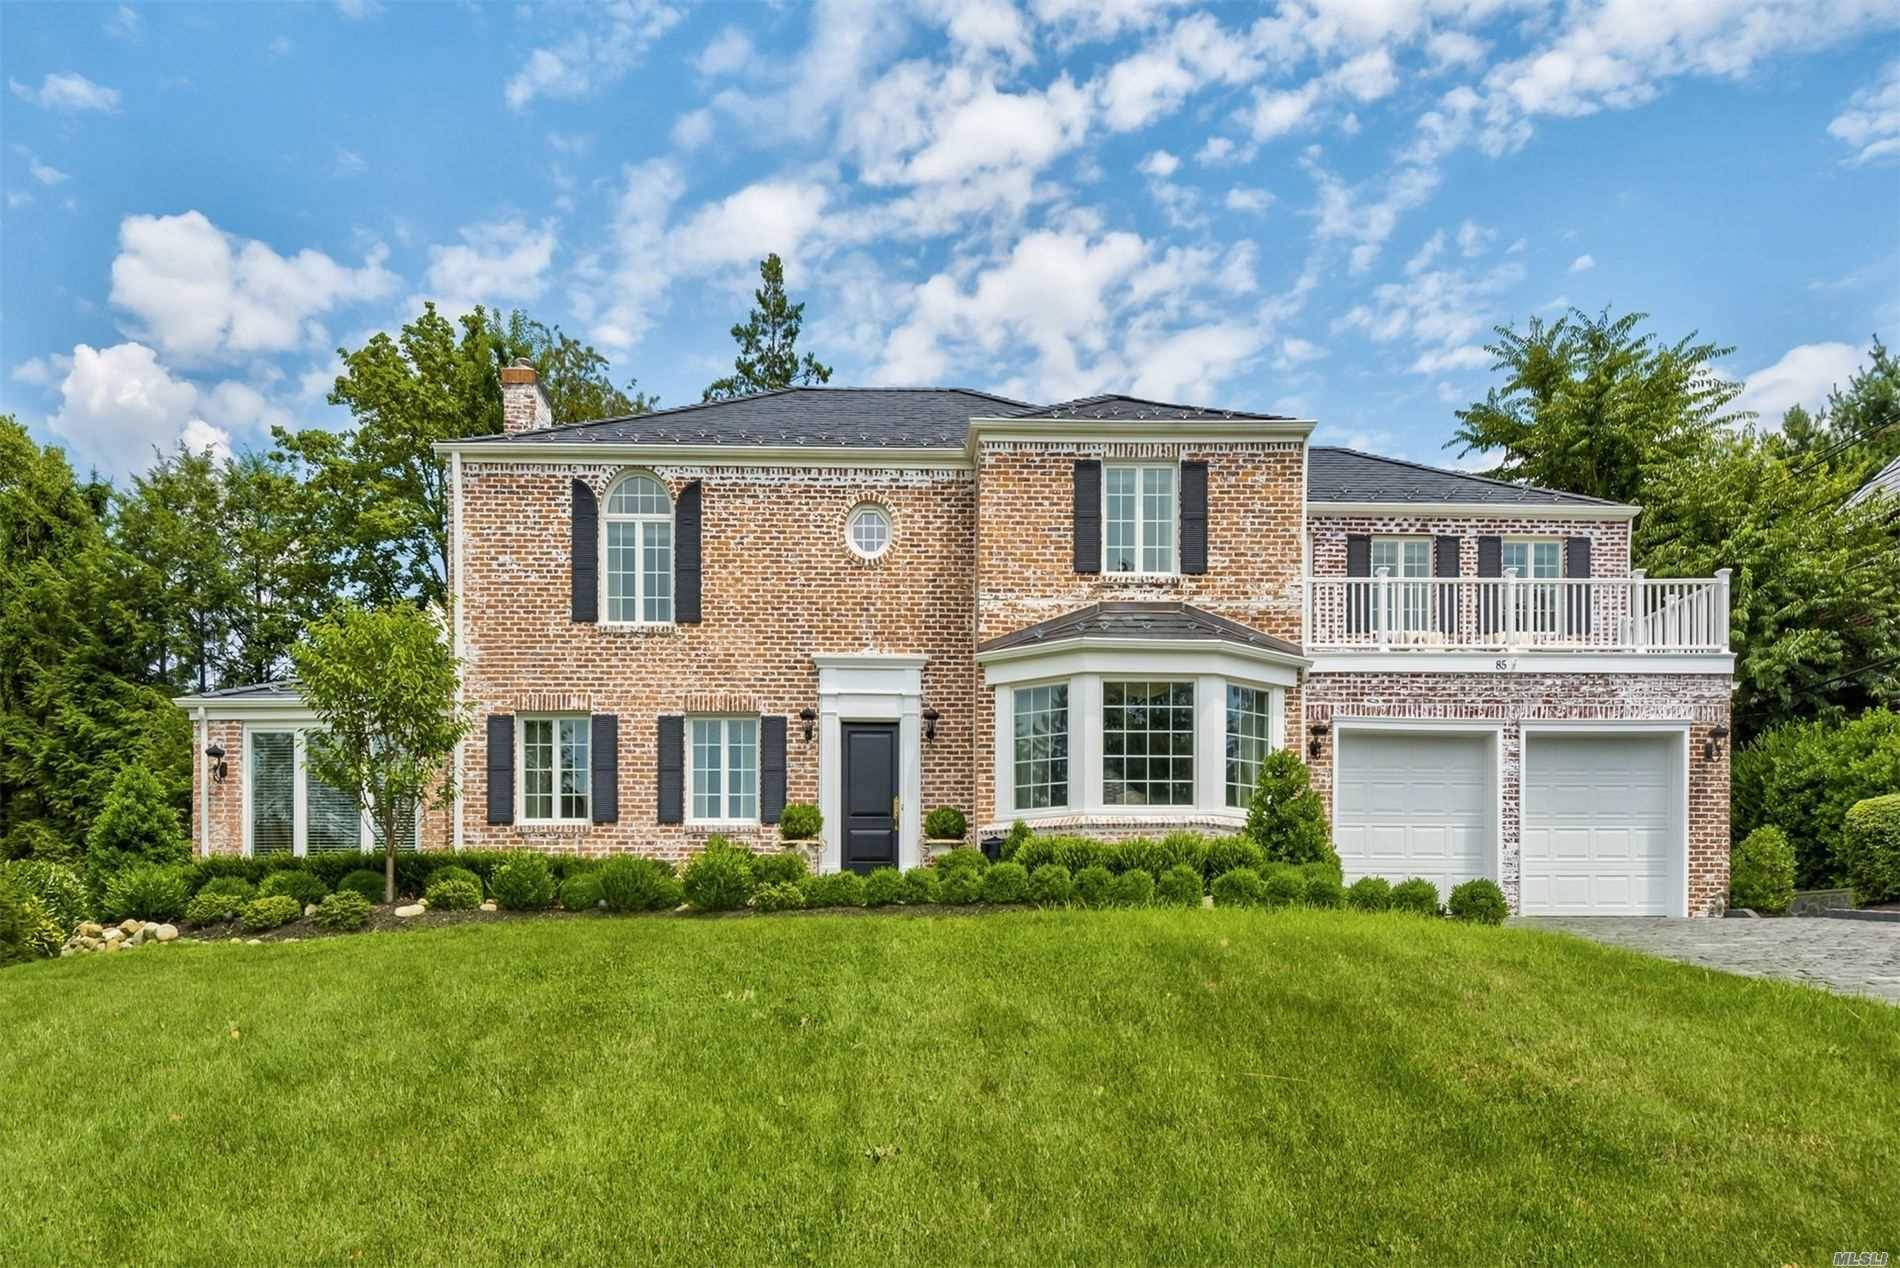 Beautiful CH Colonial in Strathmore Vanderbilt w gorgeous curb appeal.